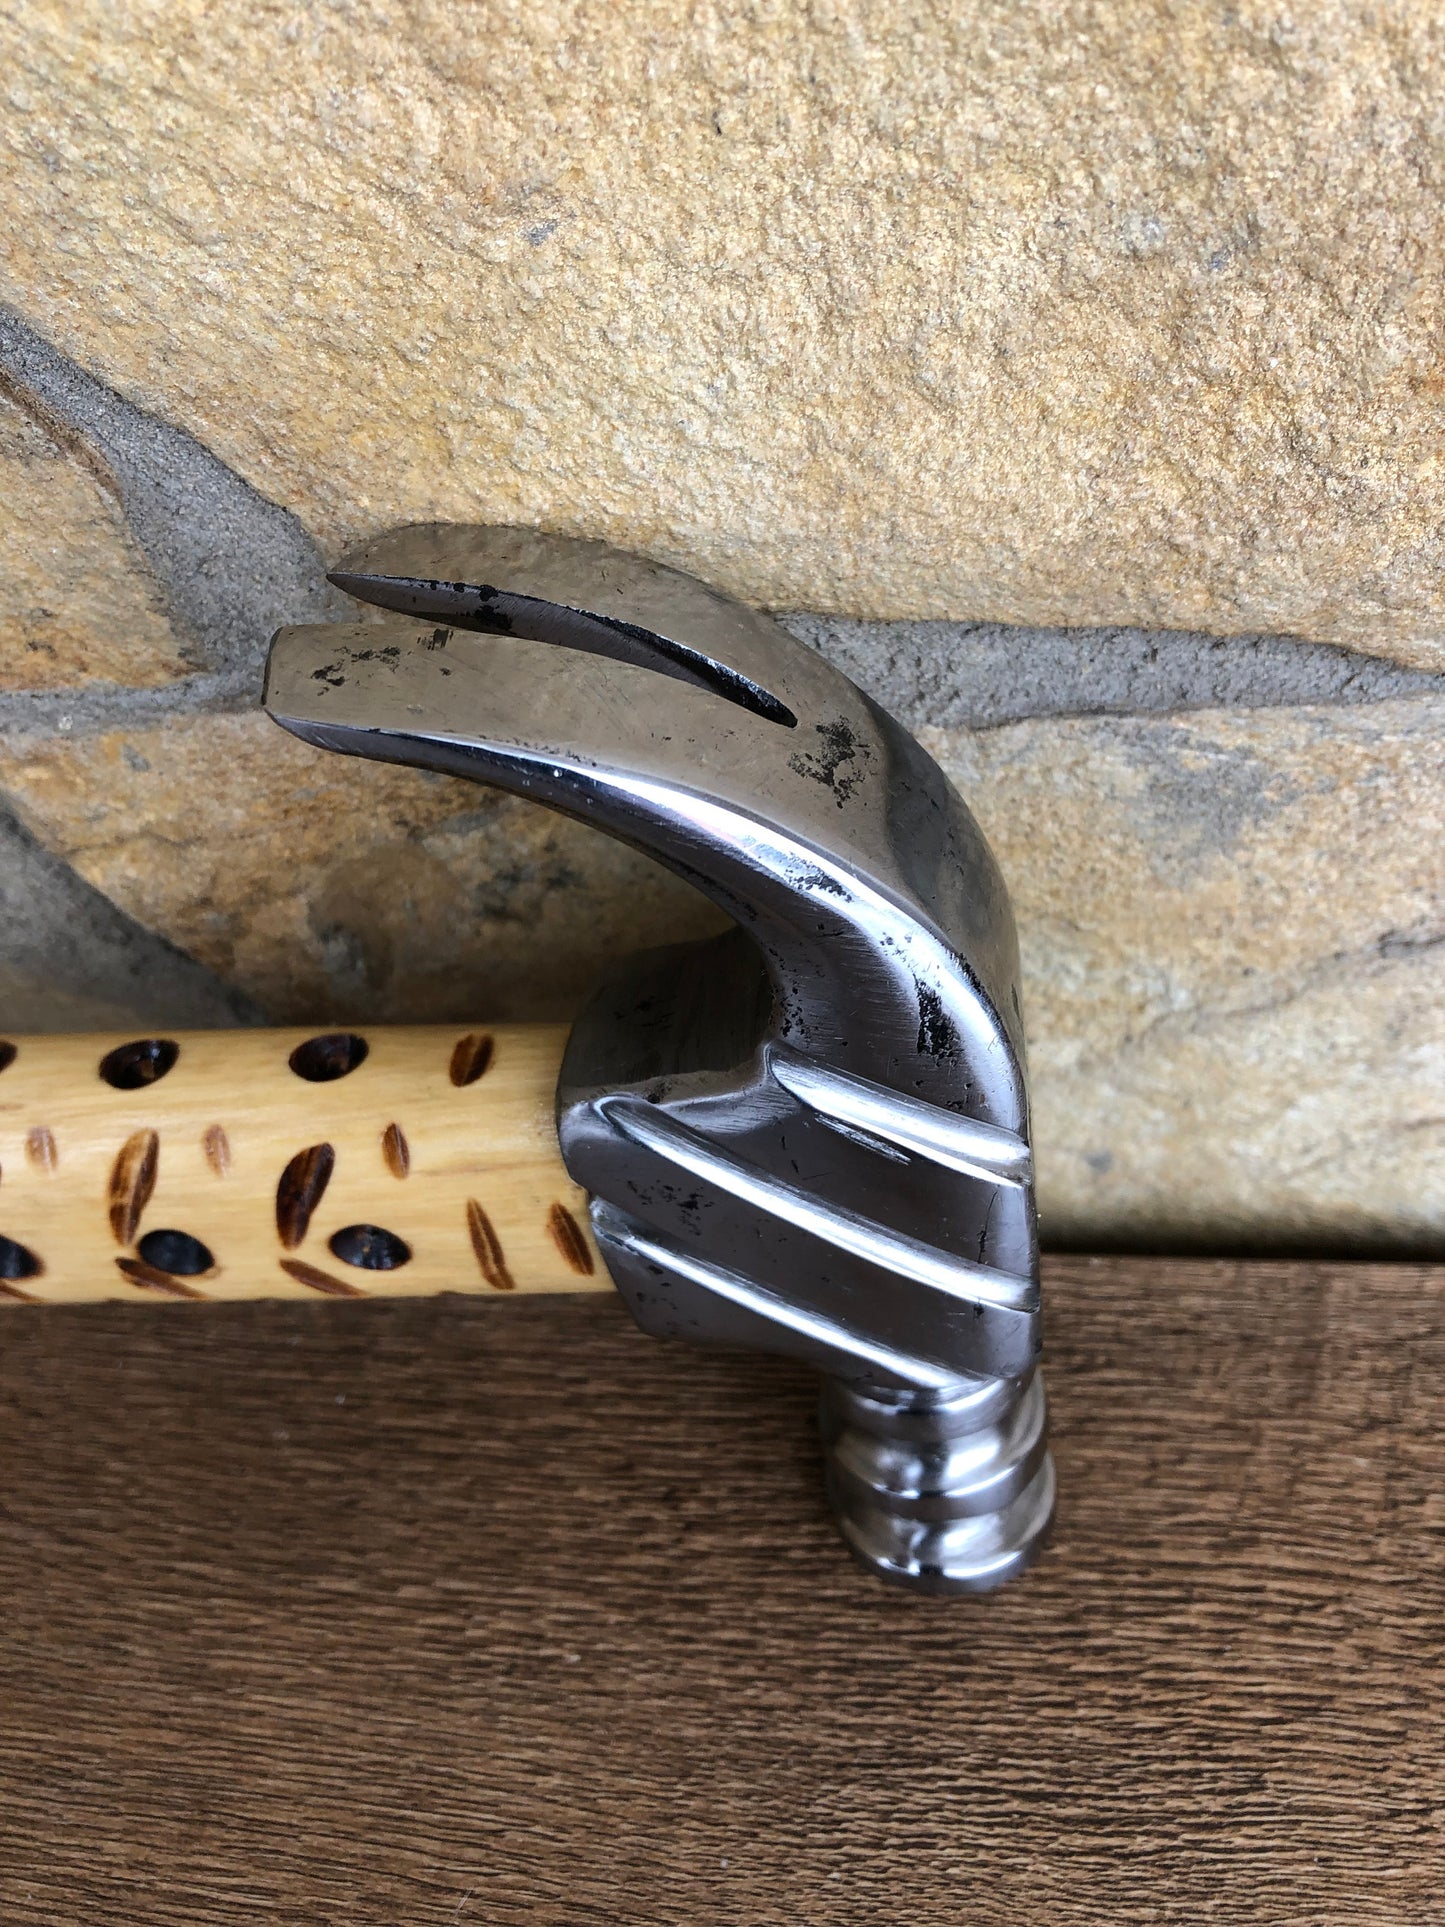 Claw hammer, hammer, gift for father, hand crafted hammer, hammer dad, hammer charm, hammer display, hammer for papa, hammer for grandpa